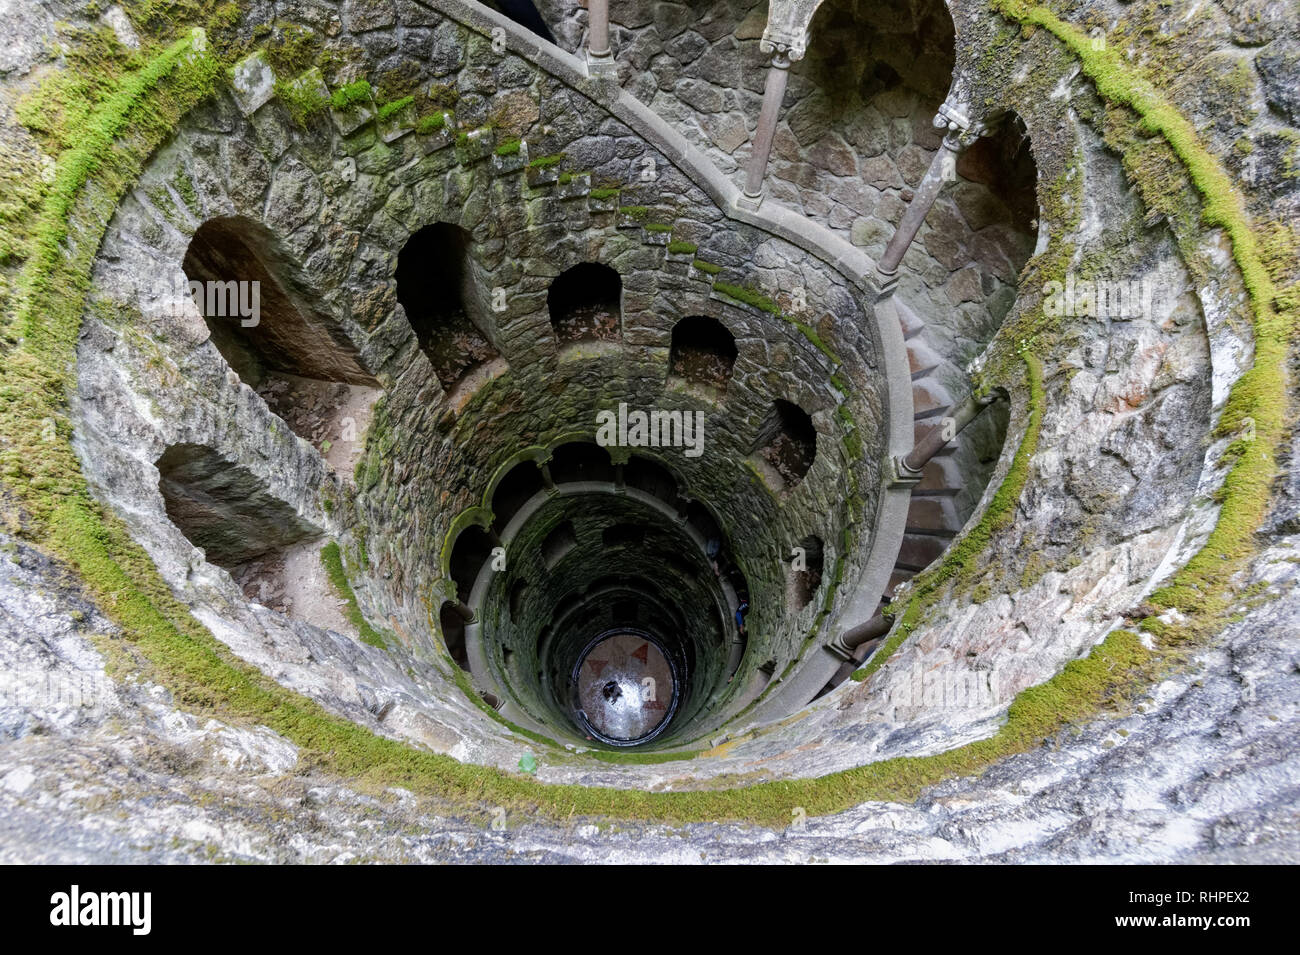 Initiation well or inverted tower in the park of the Quinta da Regaleira palace in Sintra, Portugal Stock Photo